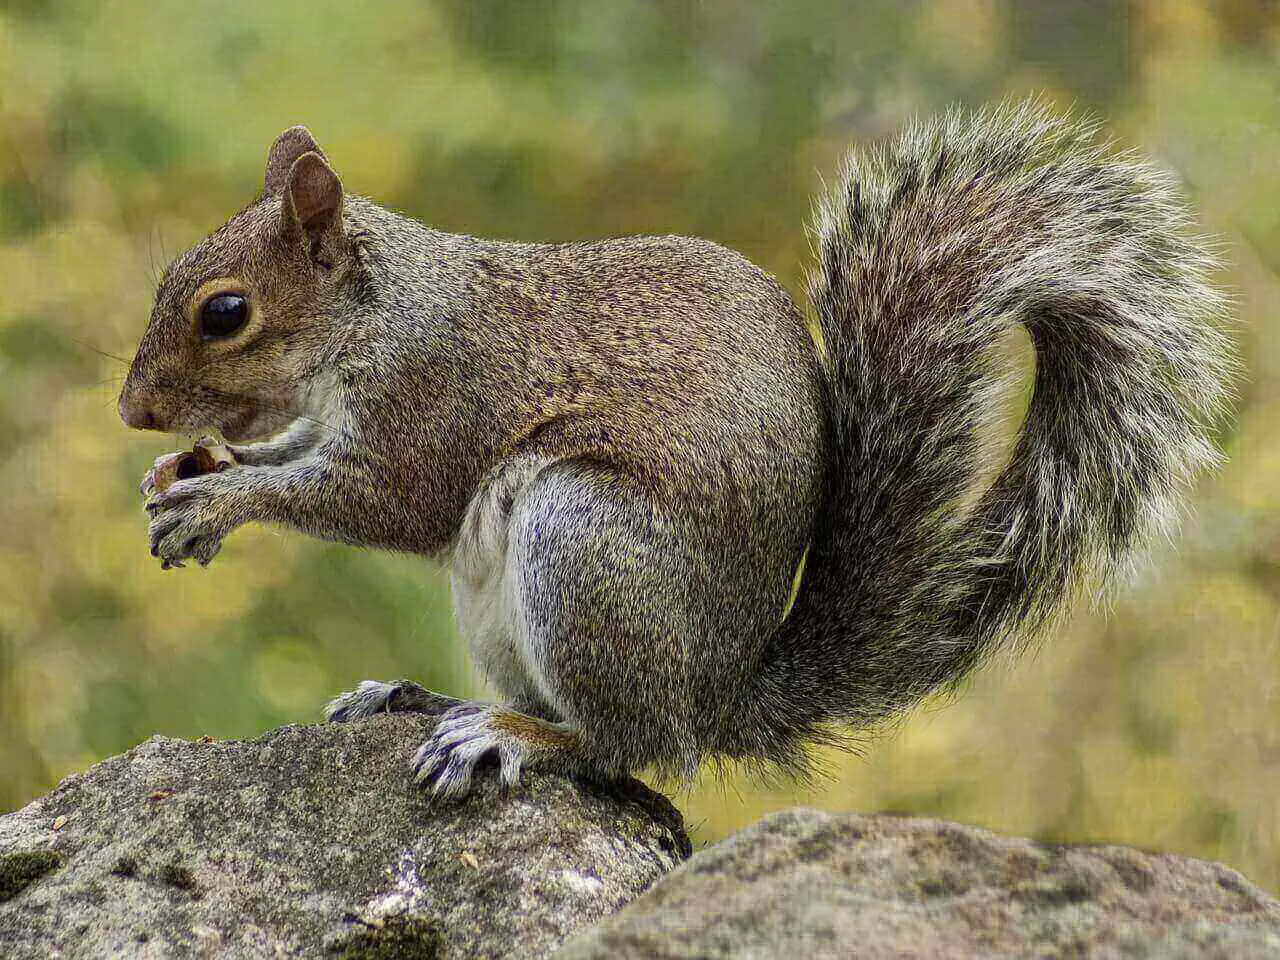 Dog Ate a Squirrel : Can Dogs Eat Squirrels? 7 Brutal Consequences